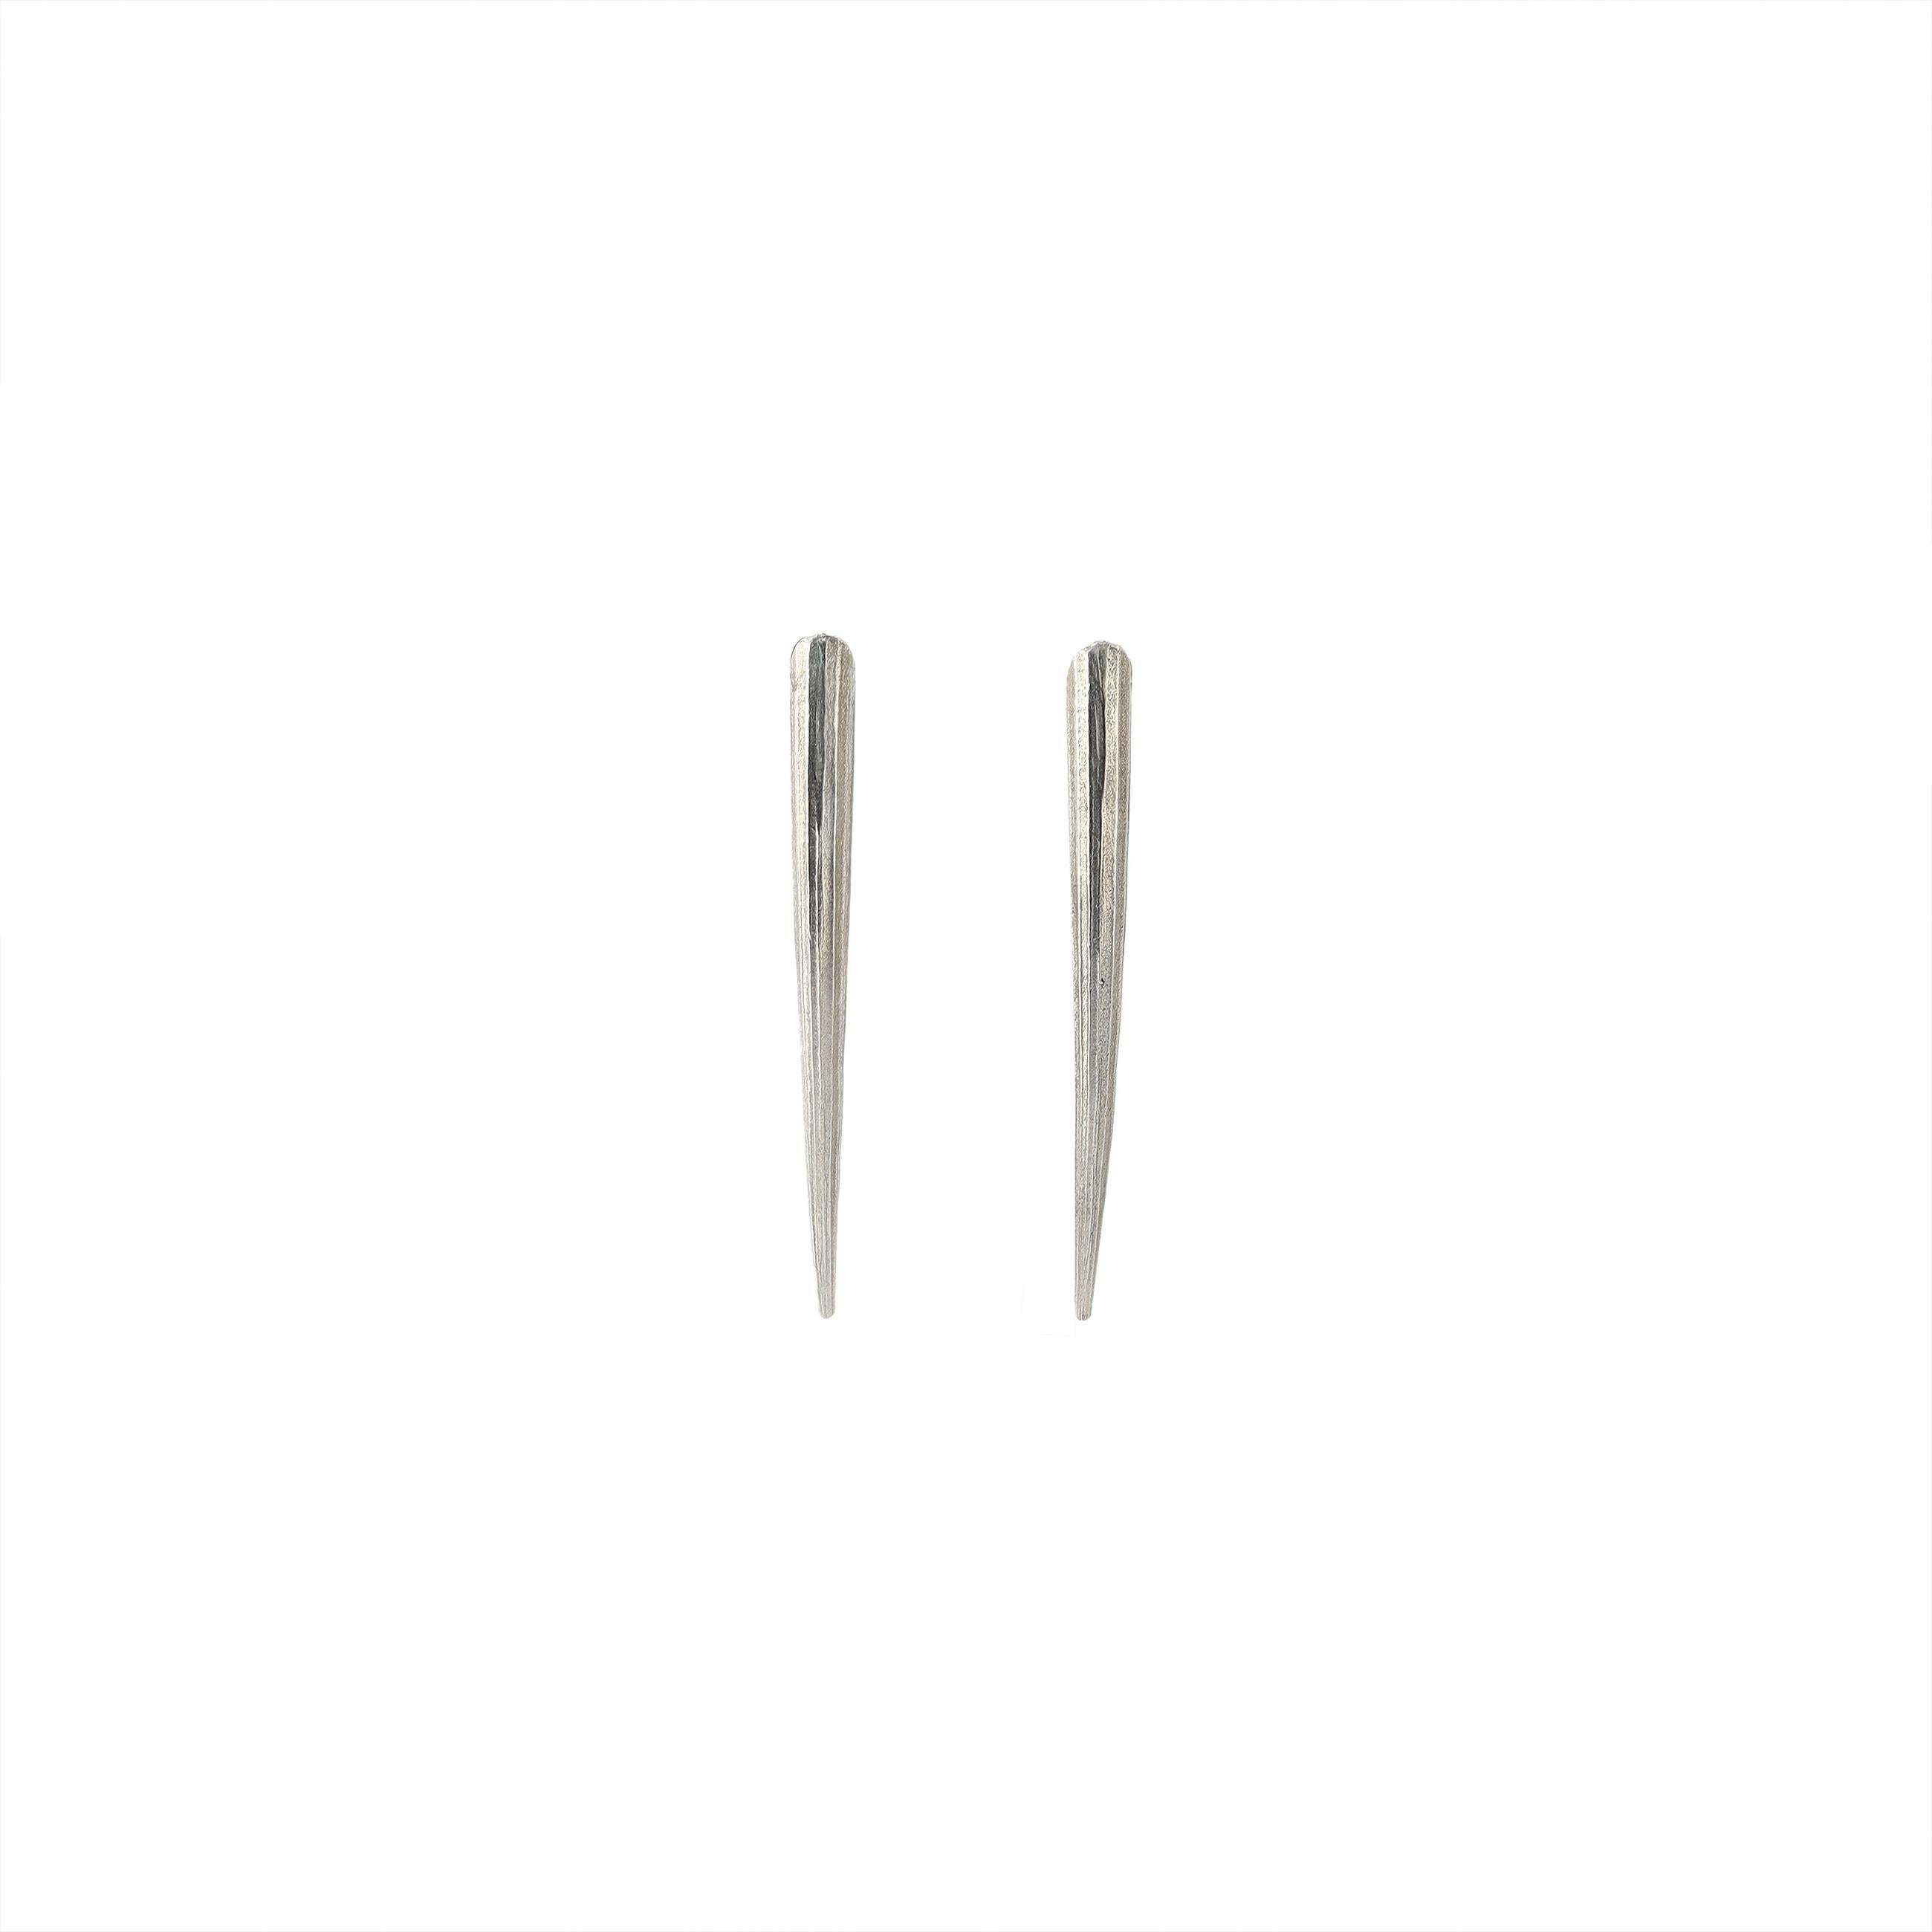 Sterling Silver Small Tusk earrings measure 1.75 inches long and feature sterling silver posts. Hand-made t order by Lauren Newton. 

Each piece is made to order so please allow extra time for delivery. Contact seller for delivery timing. 

Earrings